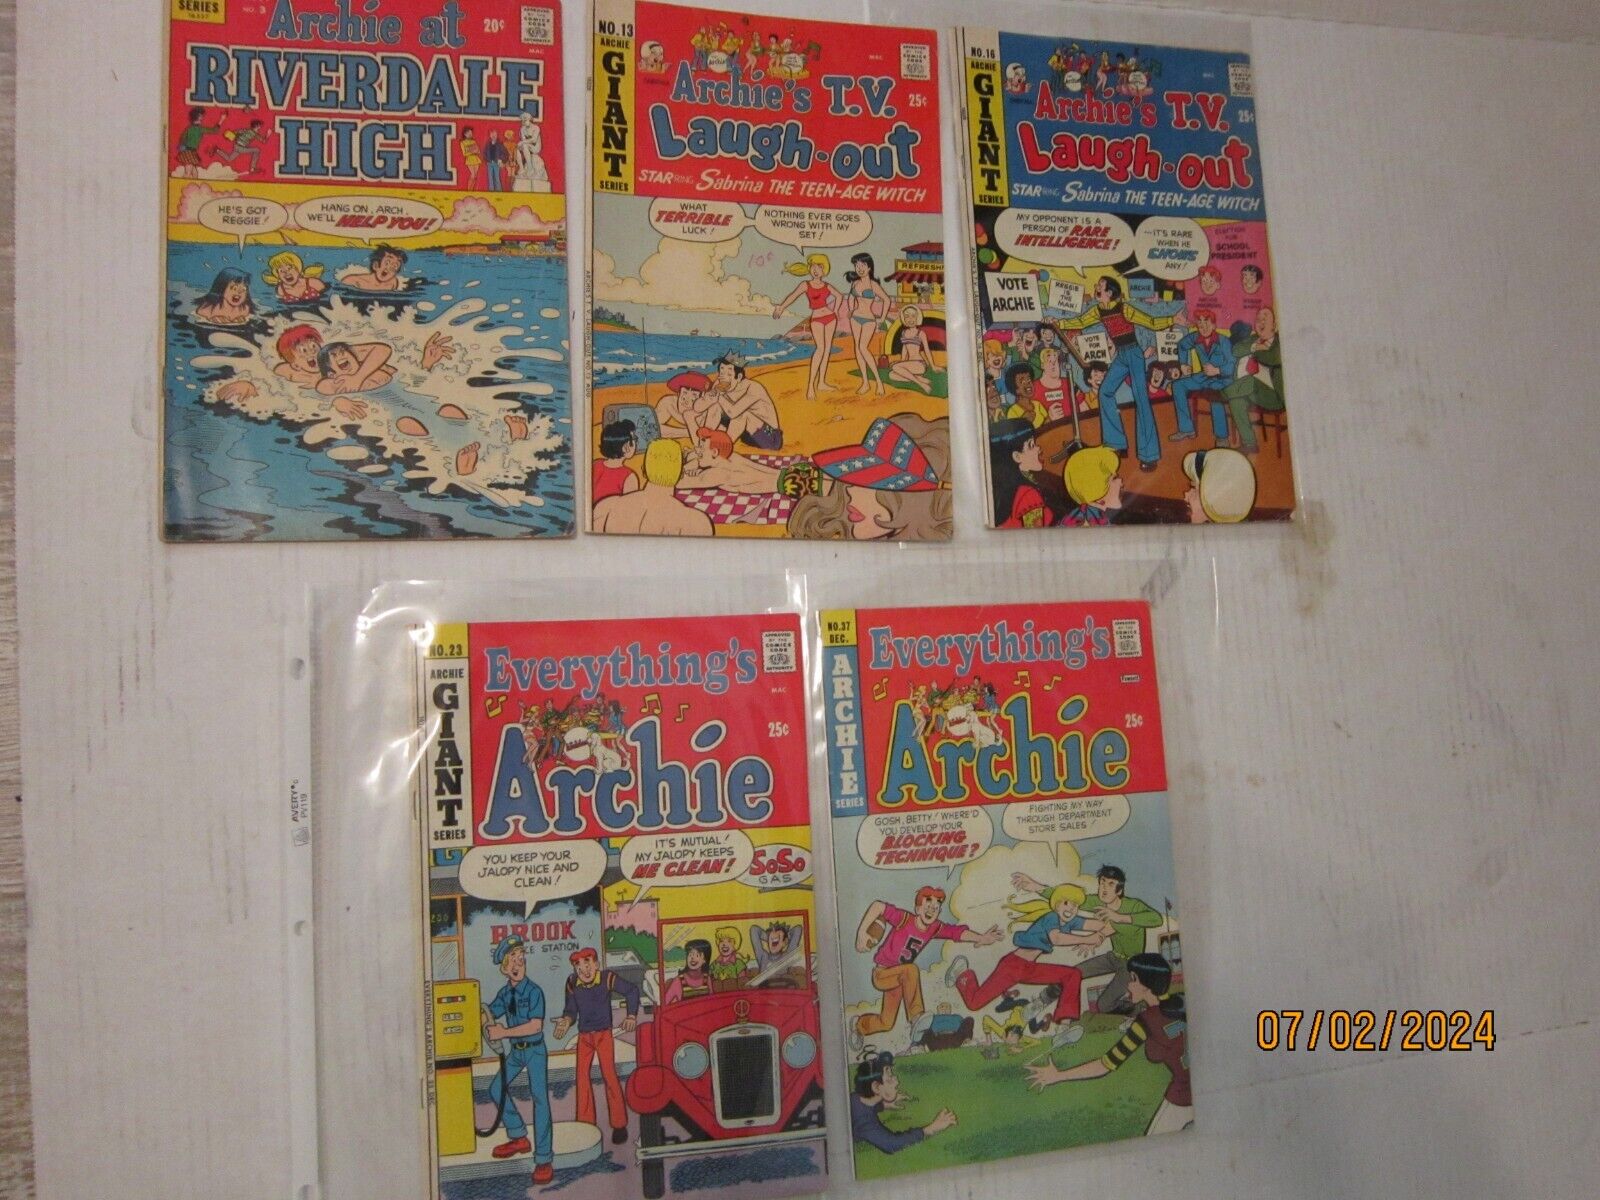 Archie at Riverdale High #3 and4 Vintage Archie’s TV Laugh-Out Comic Books